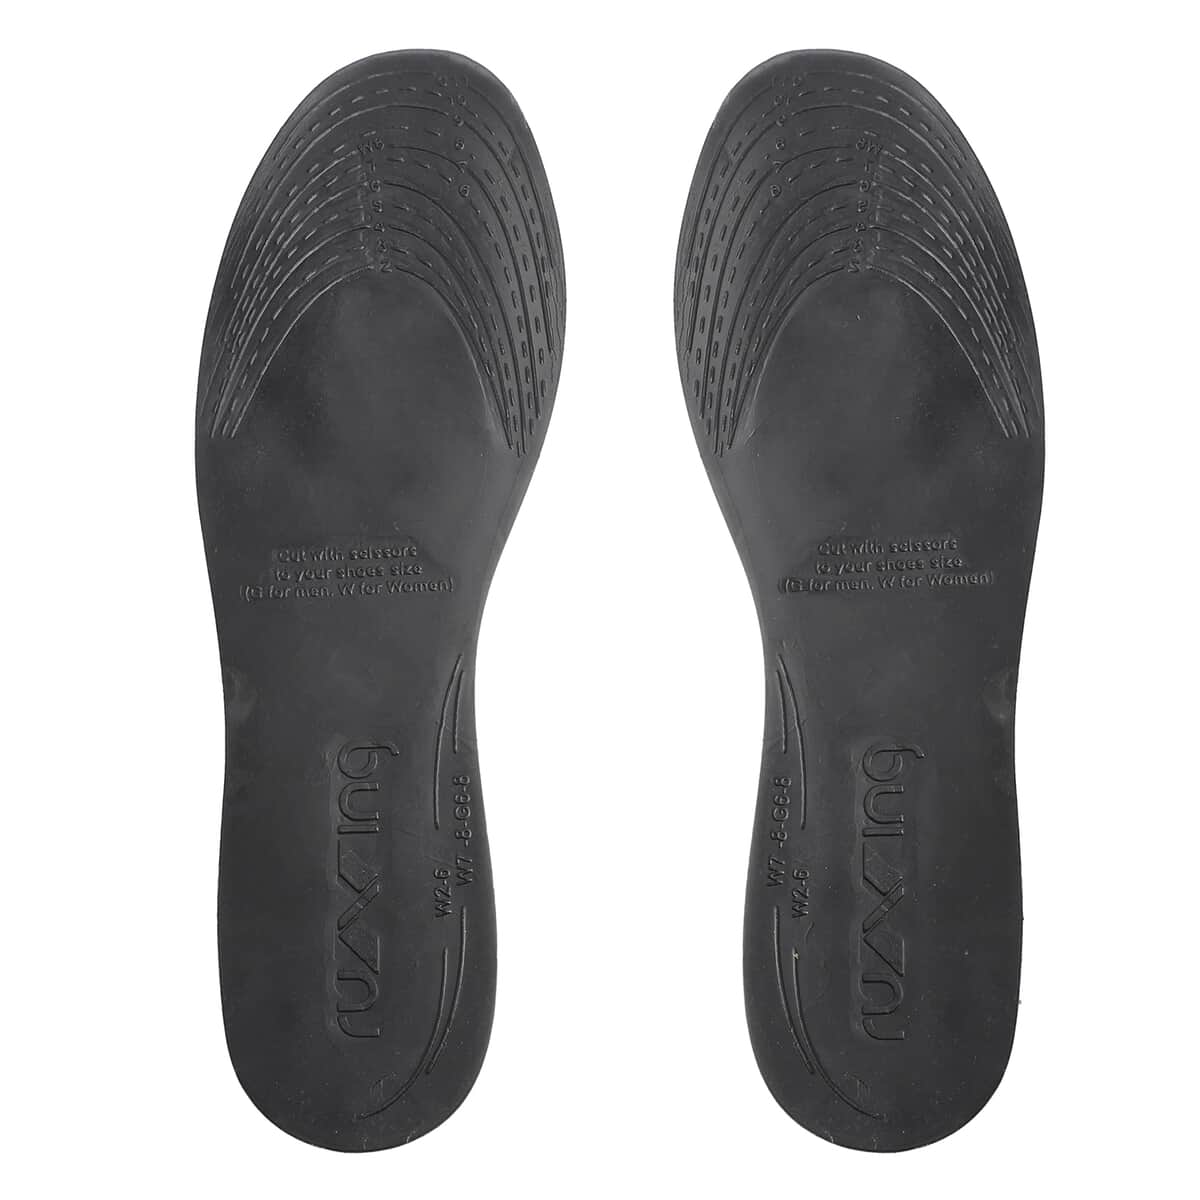 Pair of Gray and Green Shungite Infused Gel Insoles (Uses Gel Polymer) image number 4